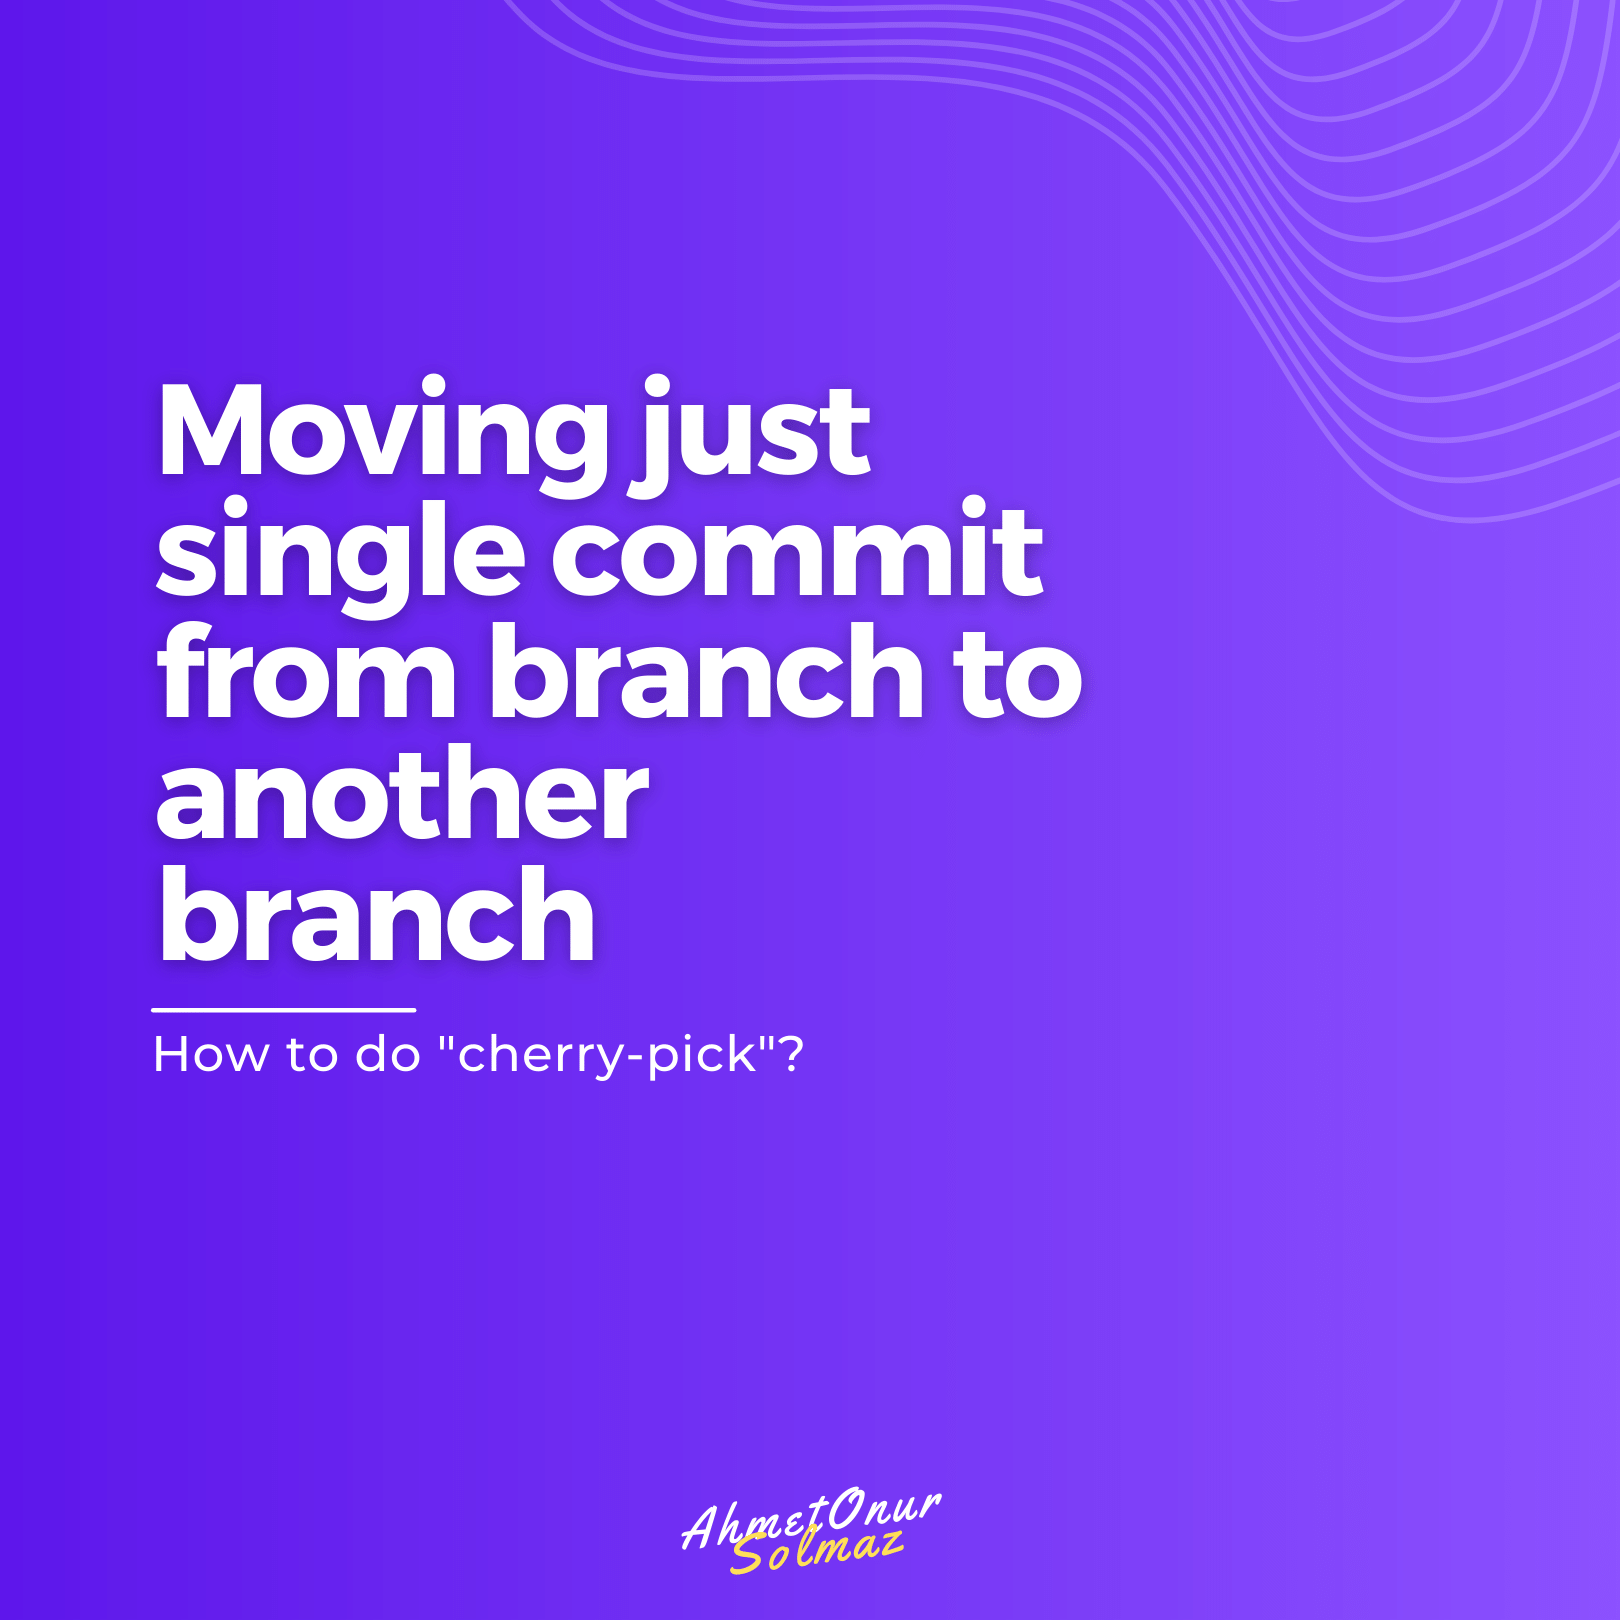 moving just single commit from branch to another branch.